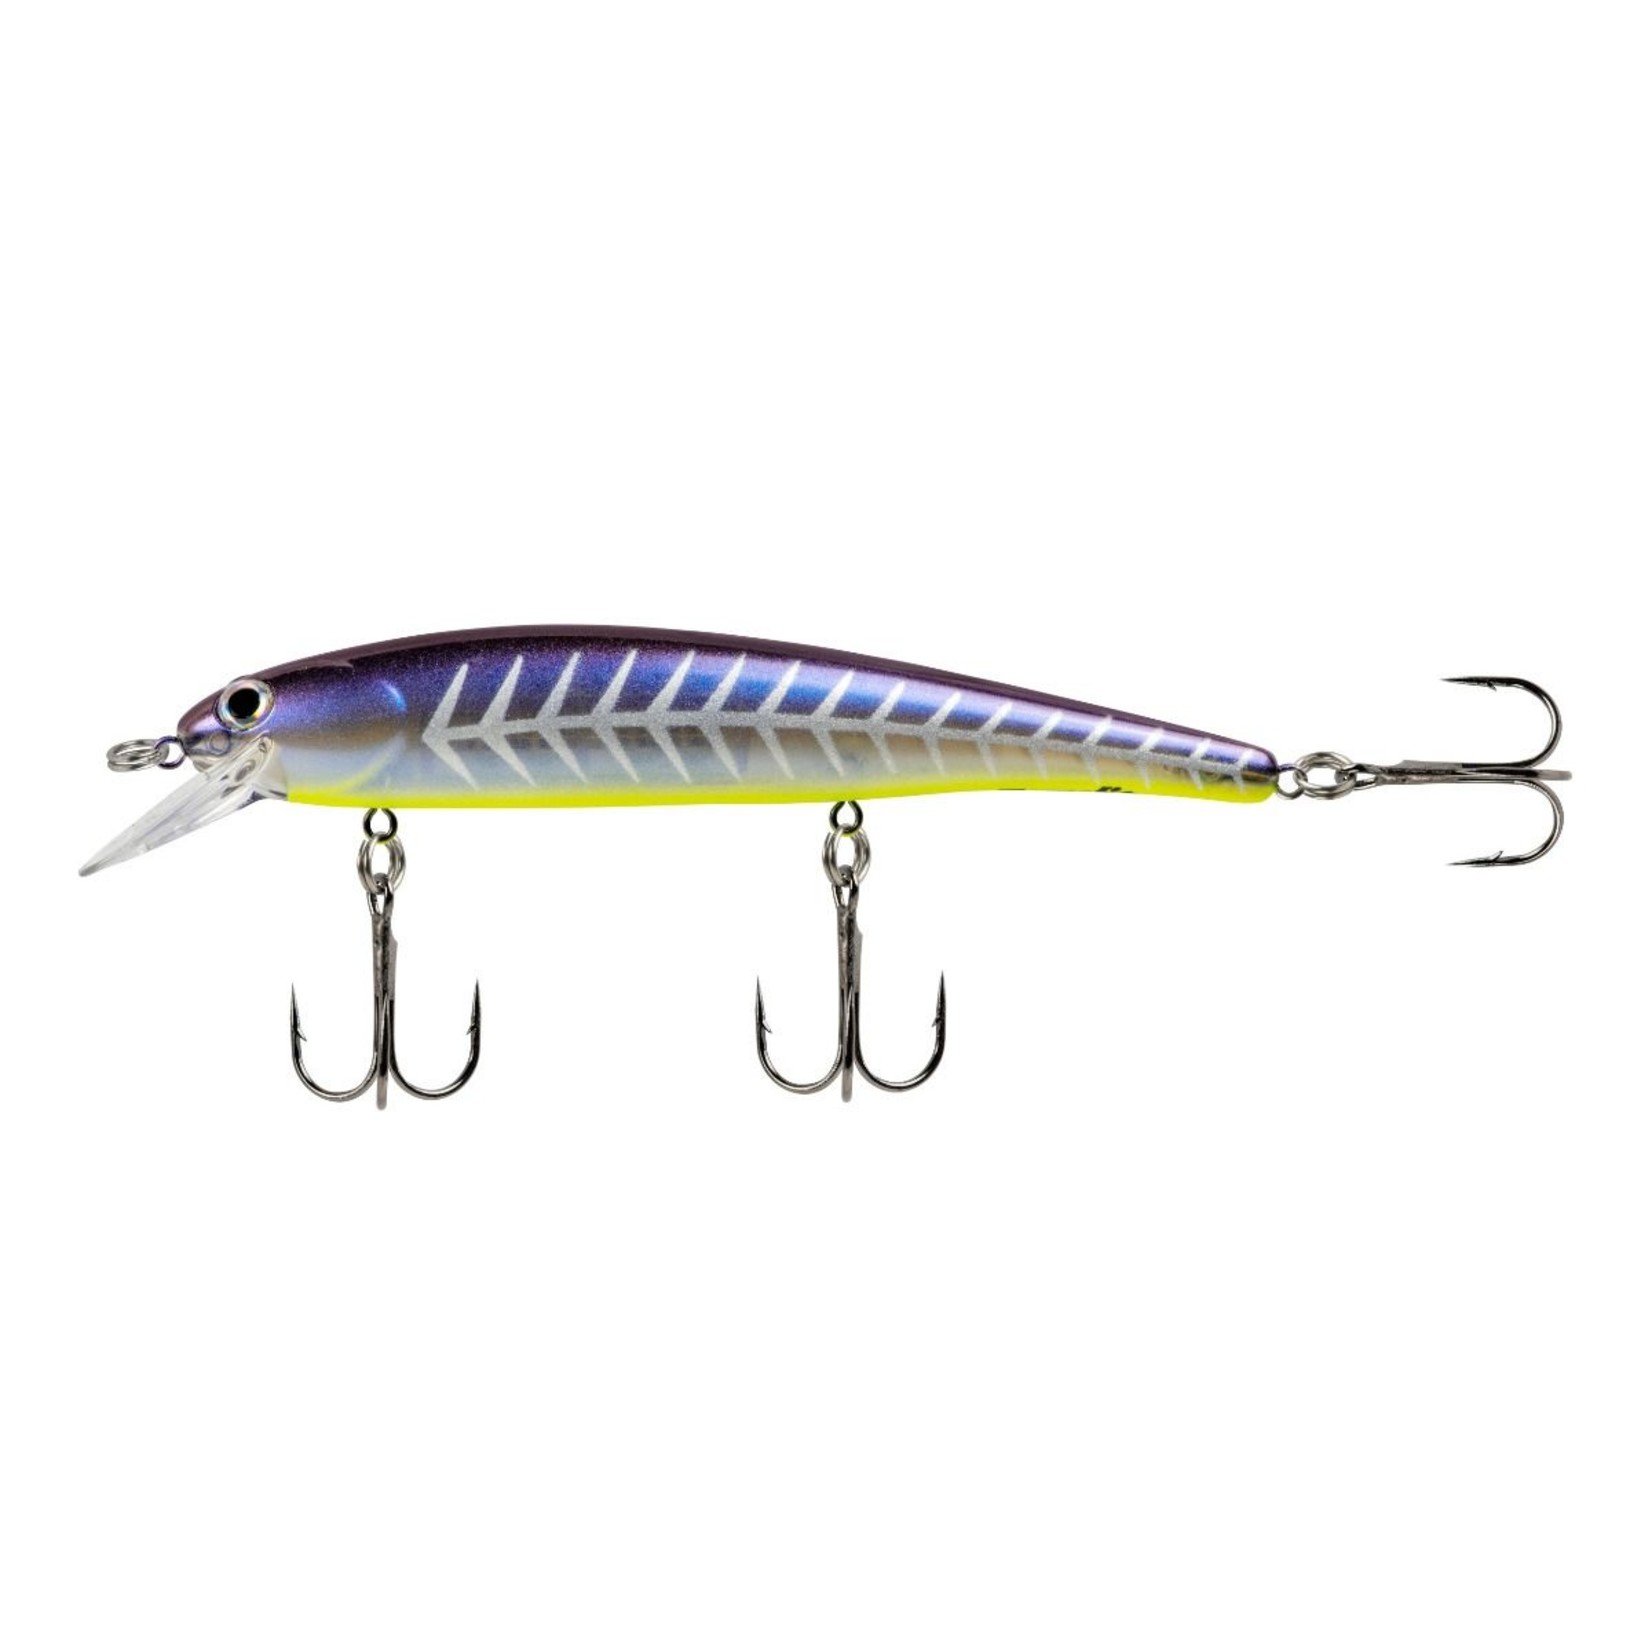 BANDIT LURES Multi-Species Minnow Jerkbait Fishing Lure, Fishing Accessories, Excellent For Bass And Walleye, 4 3/4, 5/8 Oz, Sickly Blue